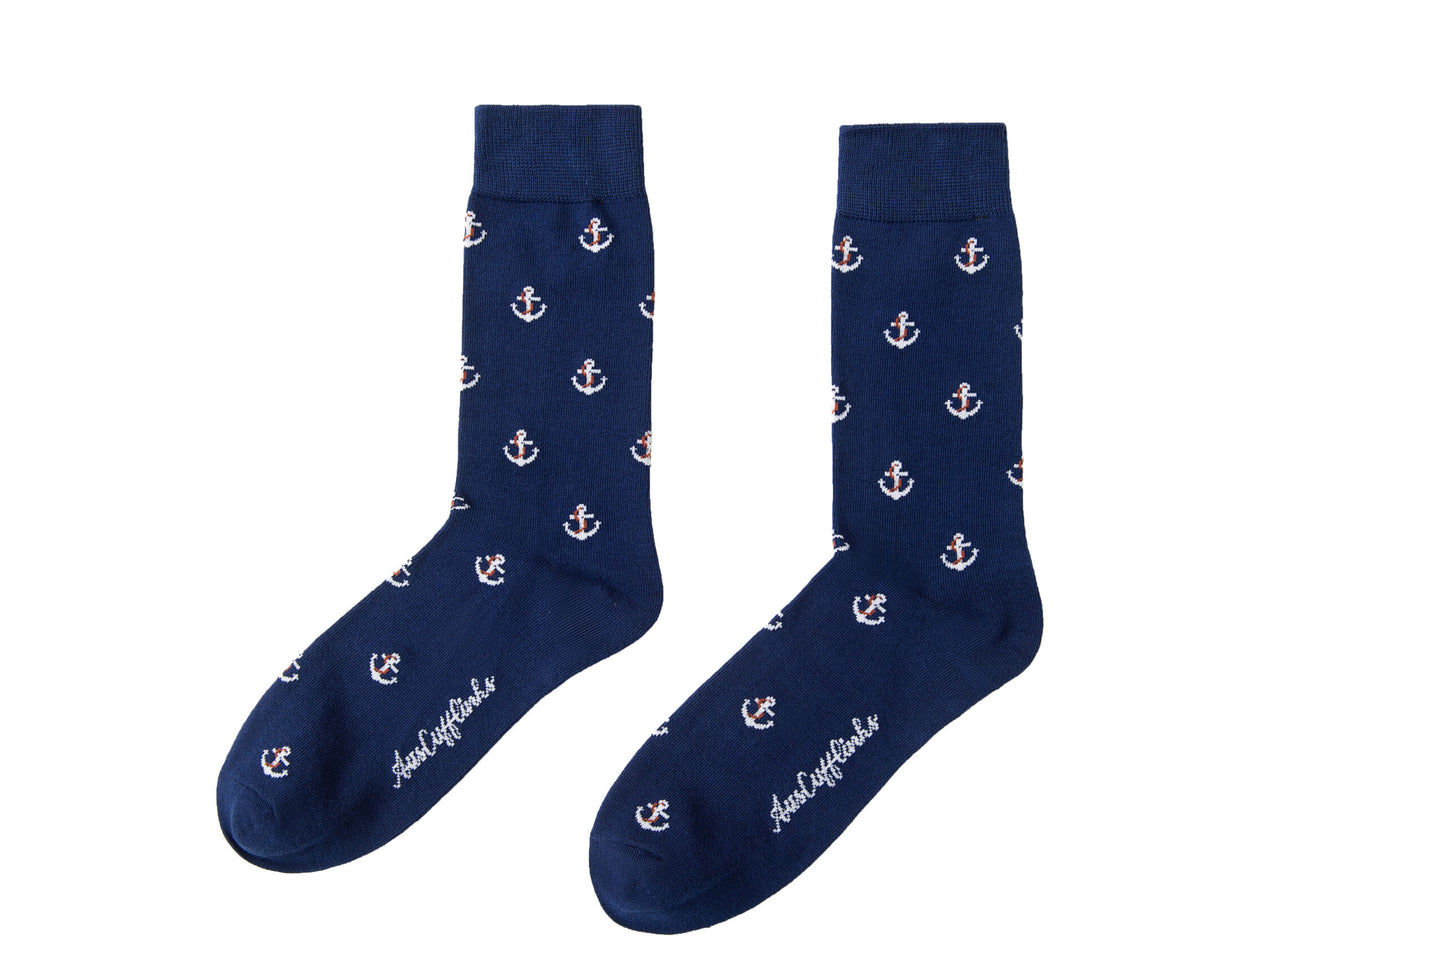 Anchor socks with anchors.